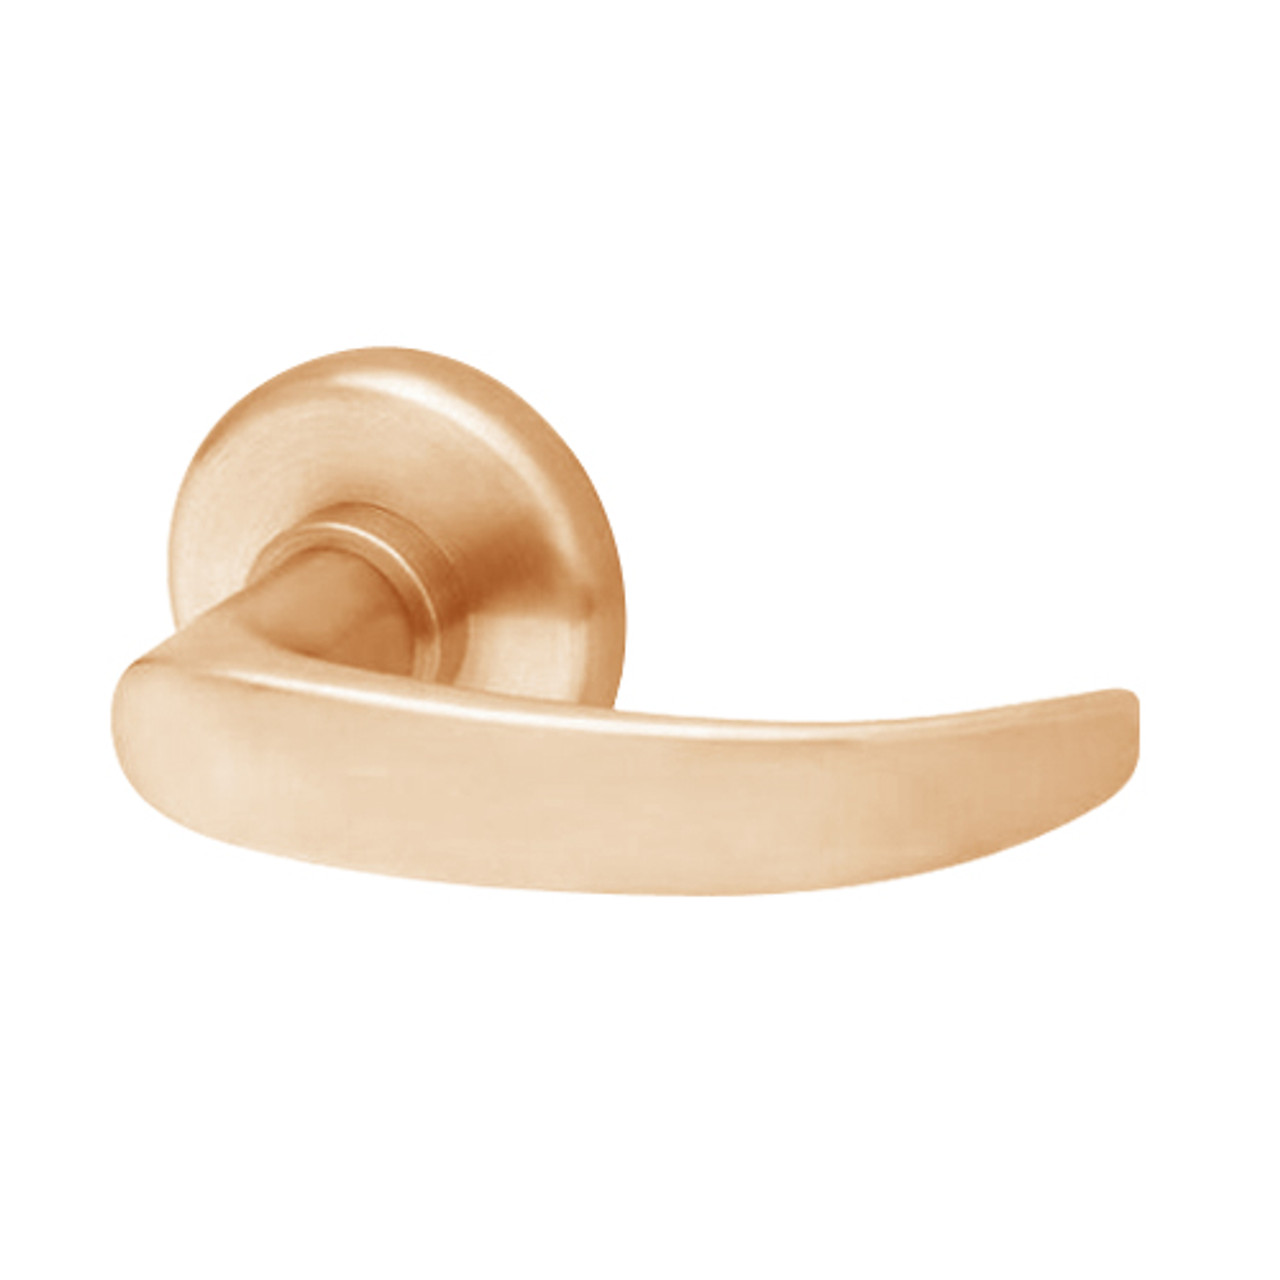 40HTKIS314H612 Best 40H Series Trim Kits Inside Lever w/ Cylinder with Curved Return Style in Satin Bronze